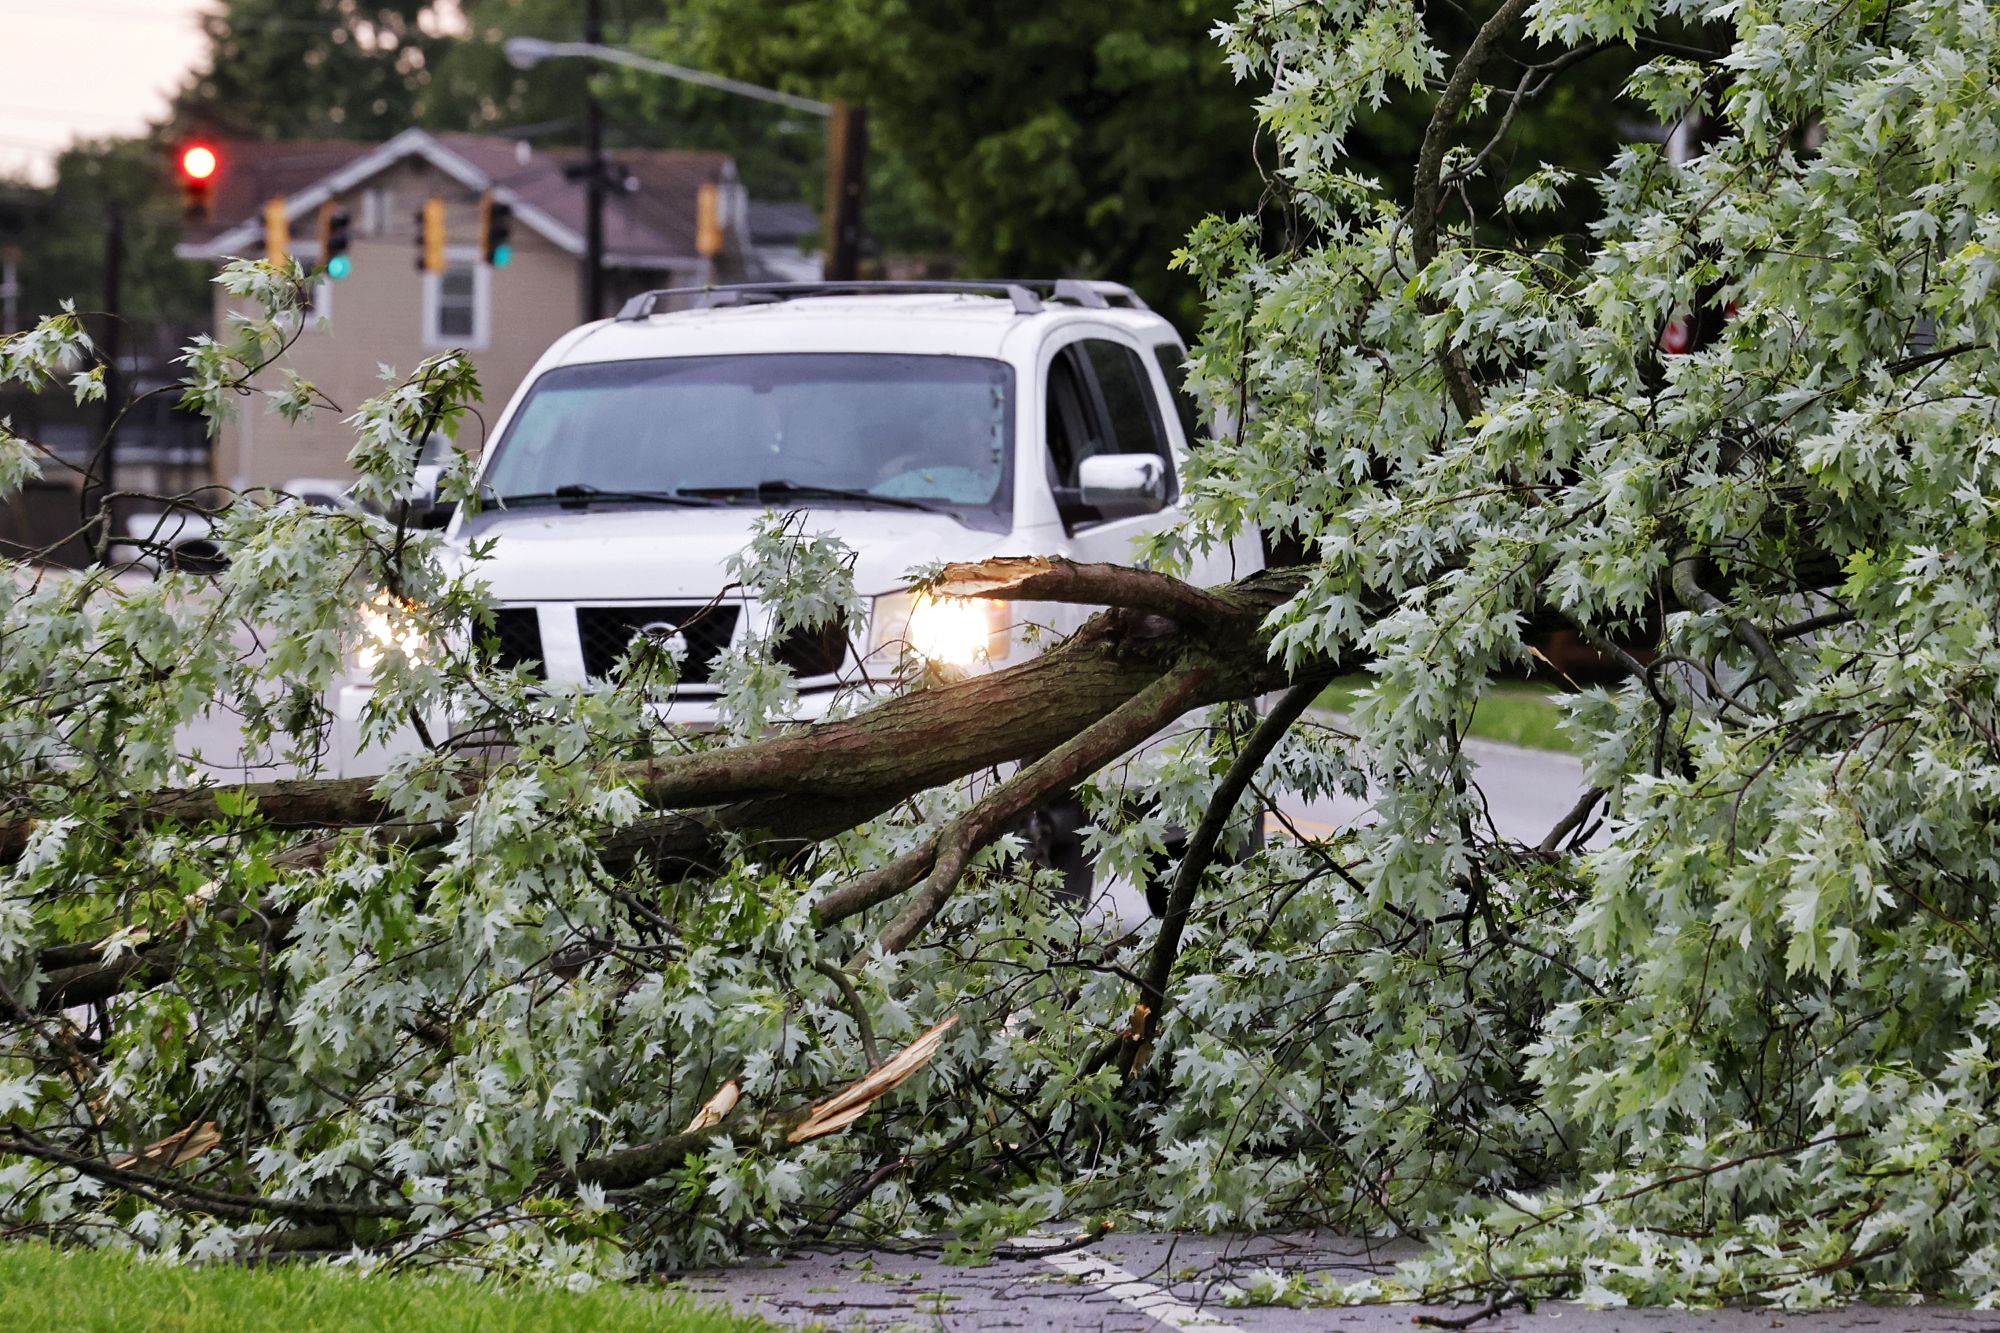 Vehicles had to reroute around several downed trees on Riverside drive in St. Clair Township after storms with heavy rain and strong winds caused power outages and down trees and limbs around Butler County Monday evening, June 13, 2022. NICK GRAHAM/STAFF